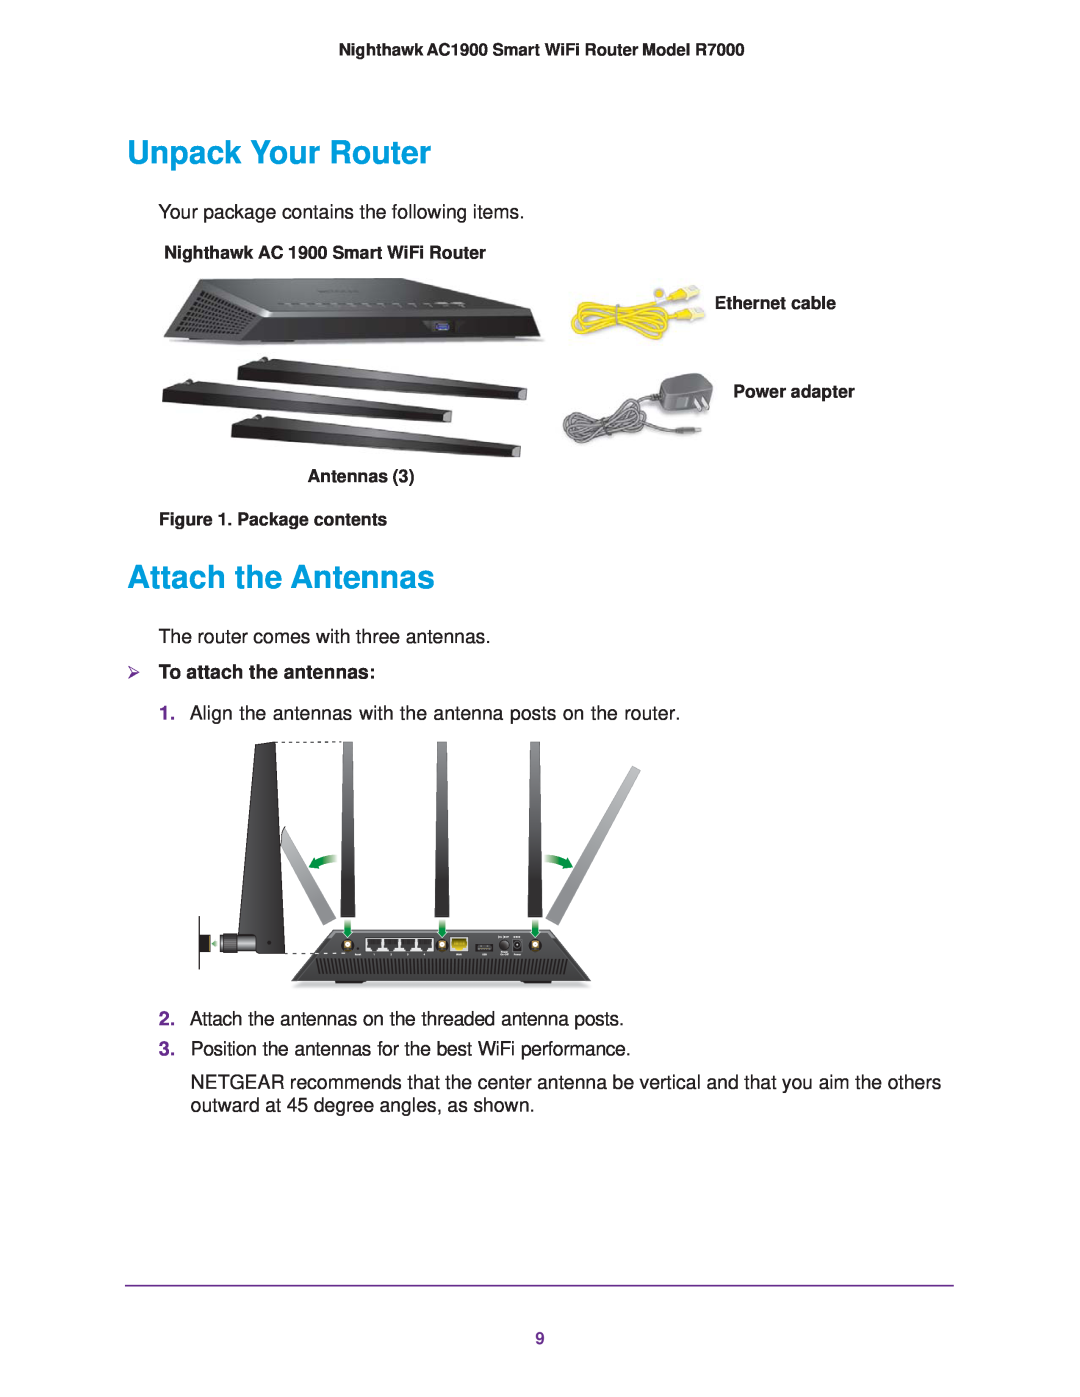 NETGEAR R7000 user manual Unpack Your Router, Attach the Antennas,  To attach the antennas 